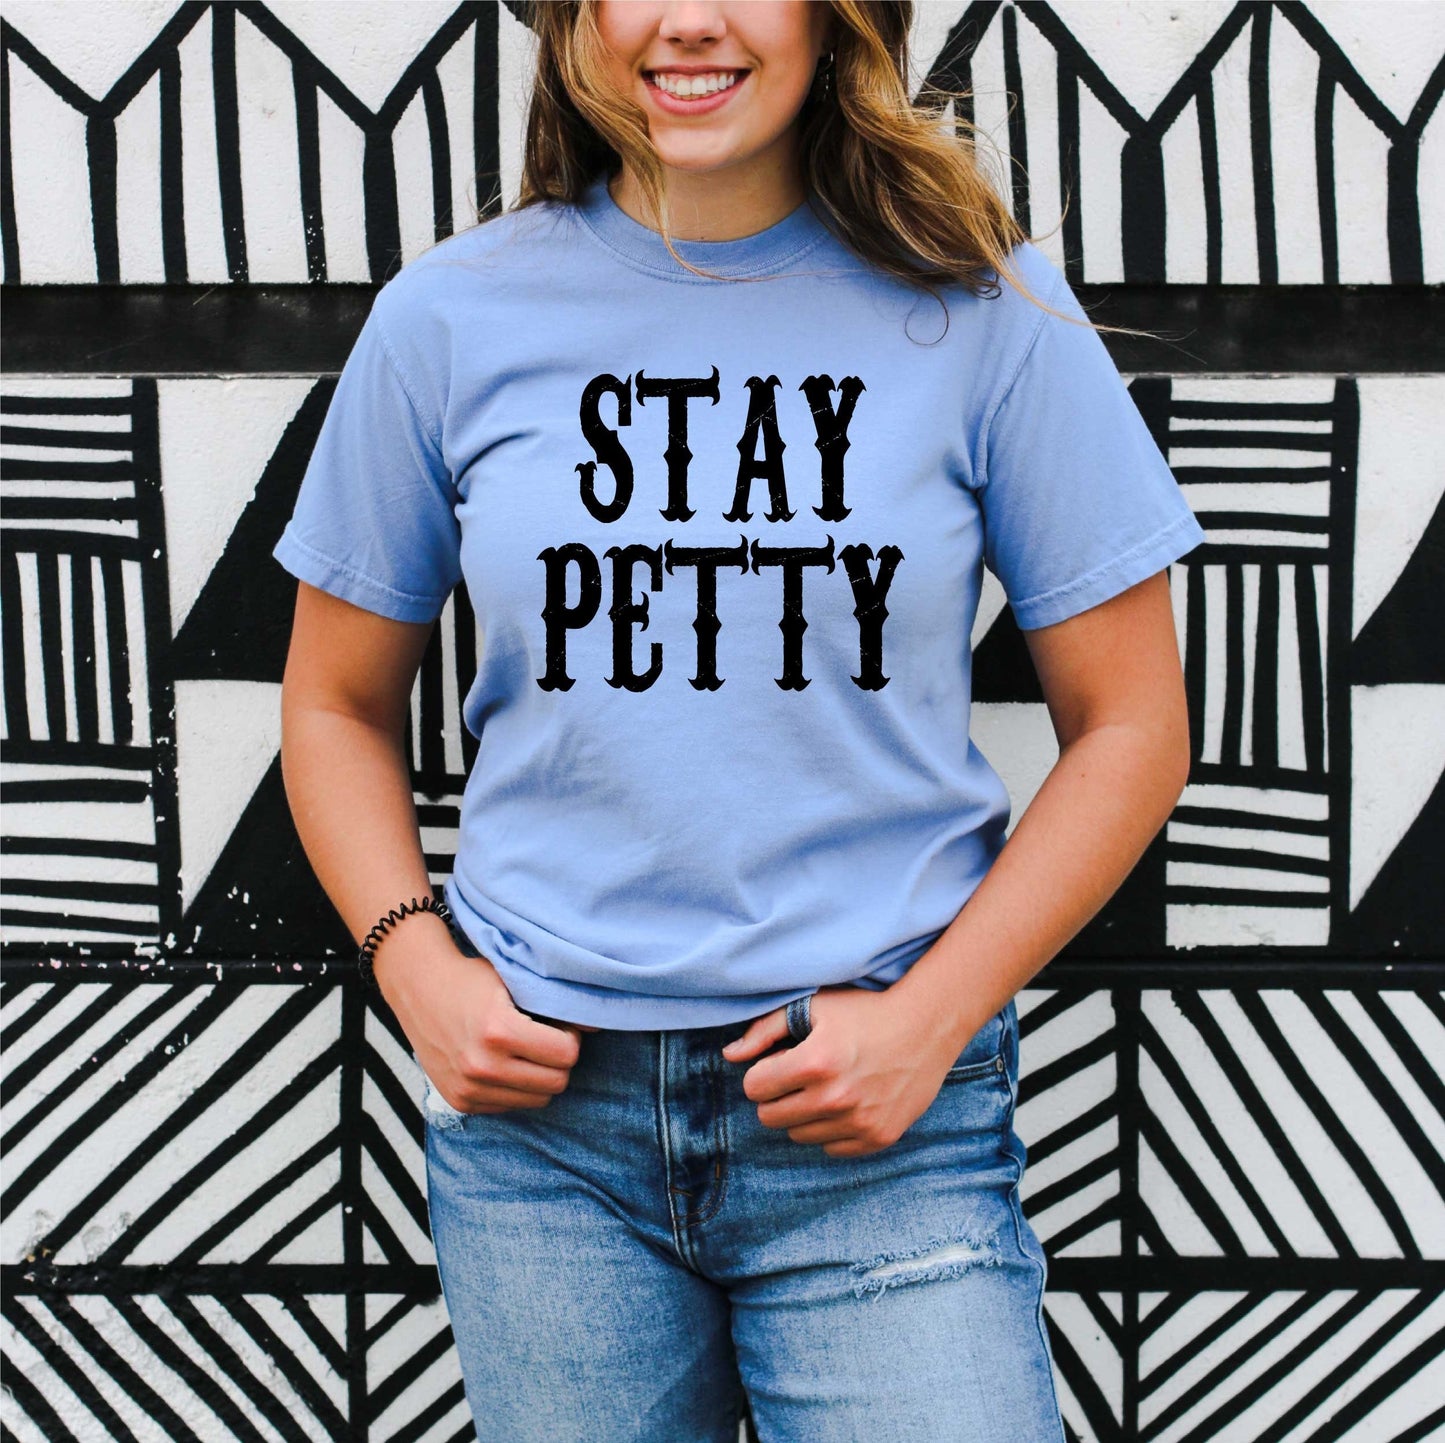 Stay Petty svg, Western svg, Funny Quote Adult humor svg, Funny Adult svg png, Petty svg png, Digital Design